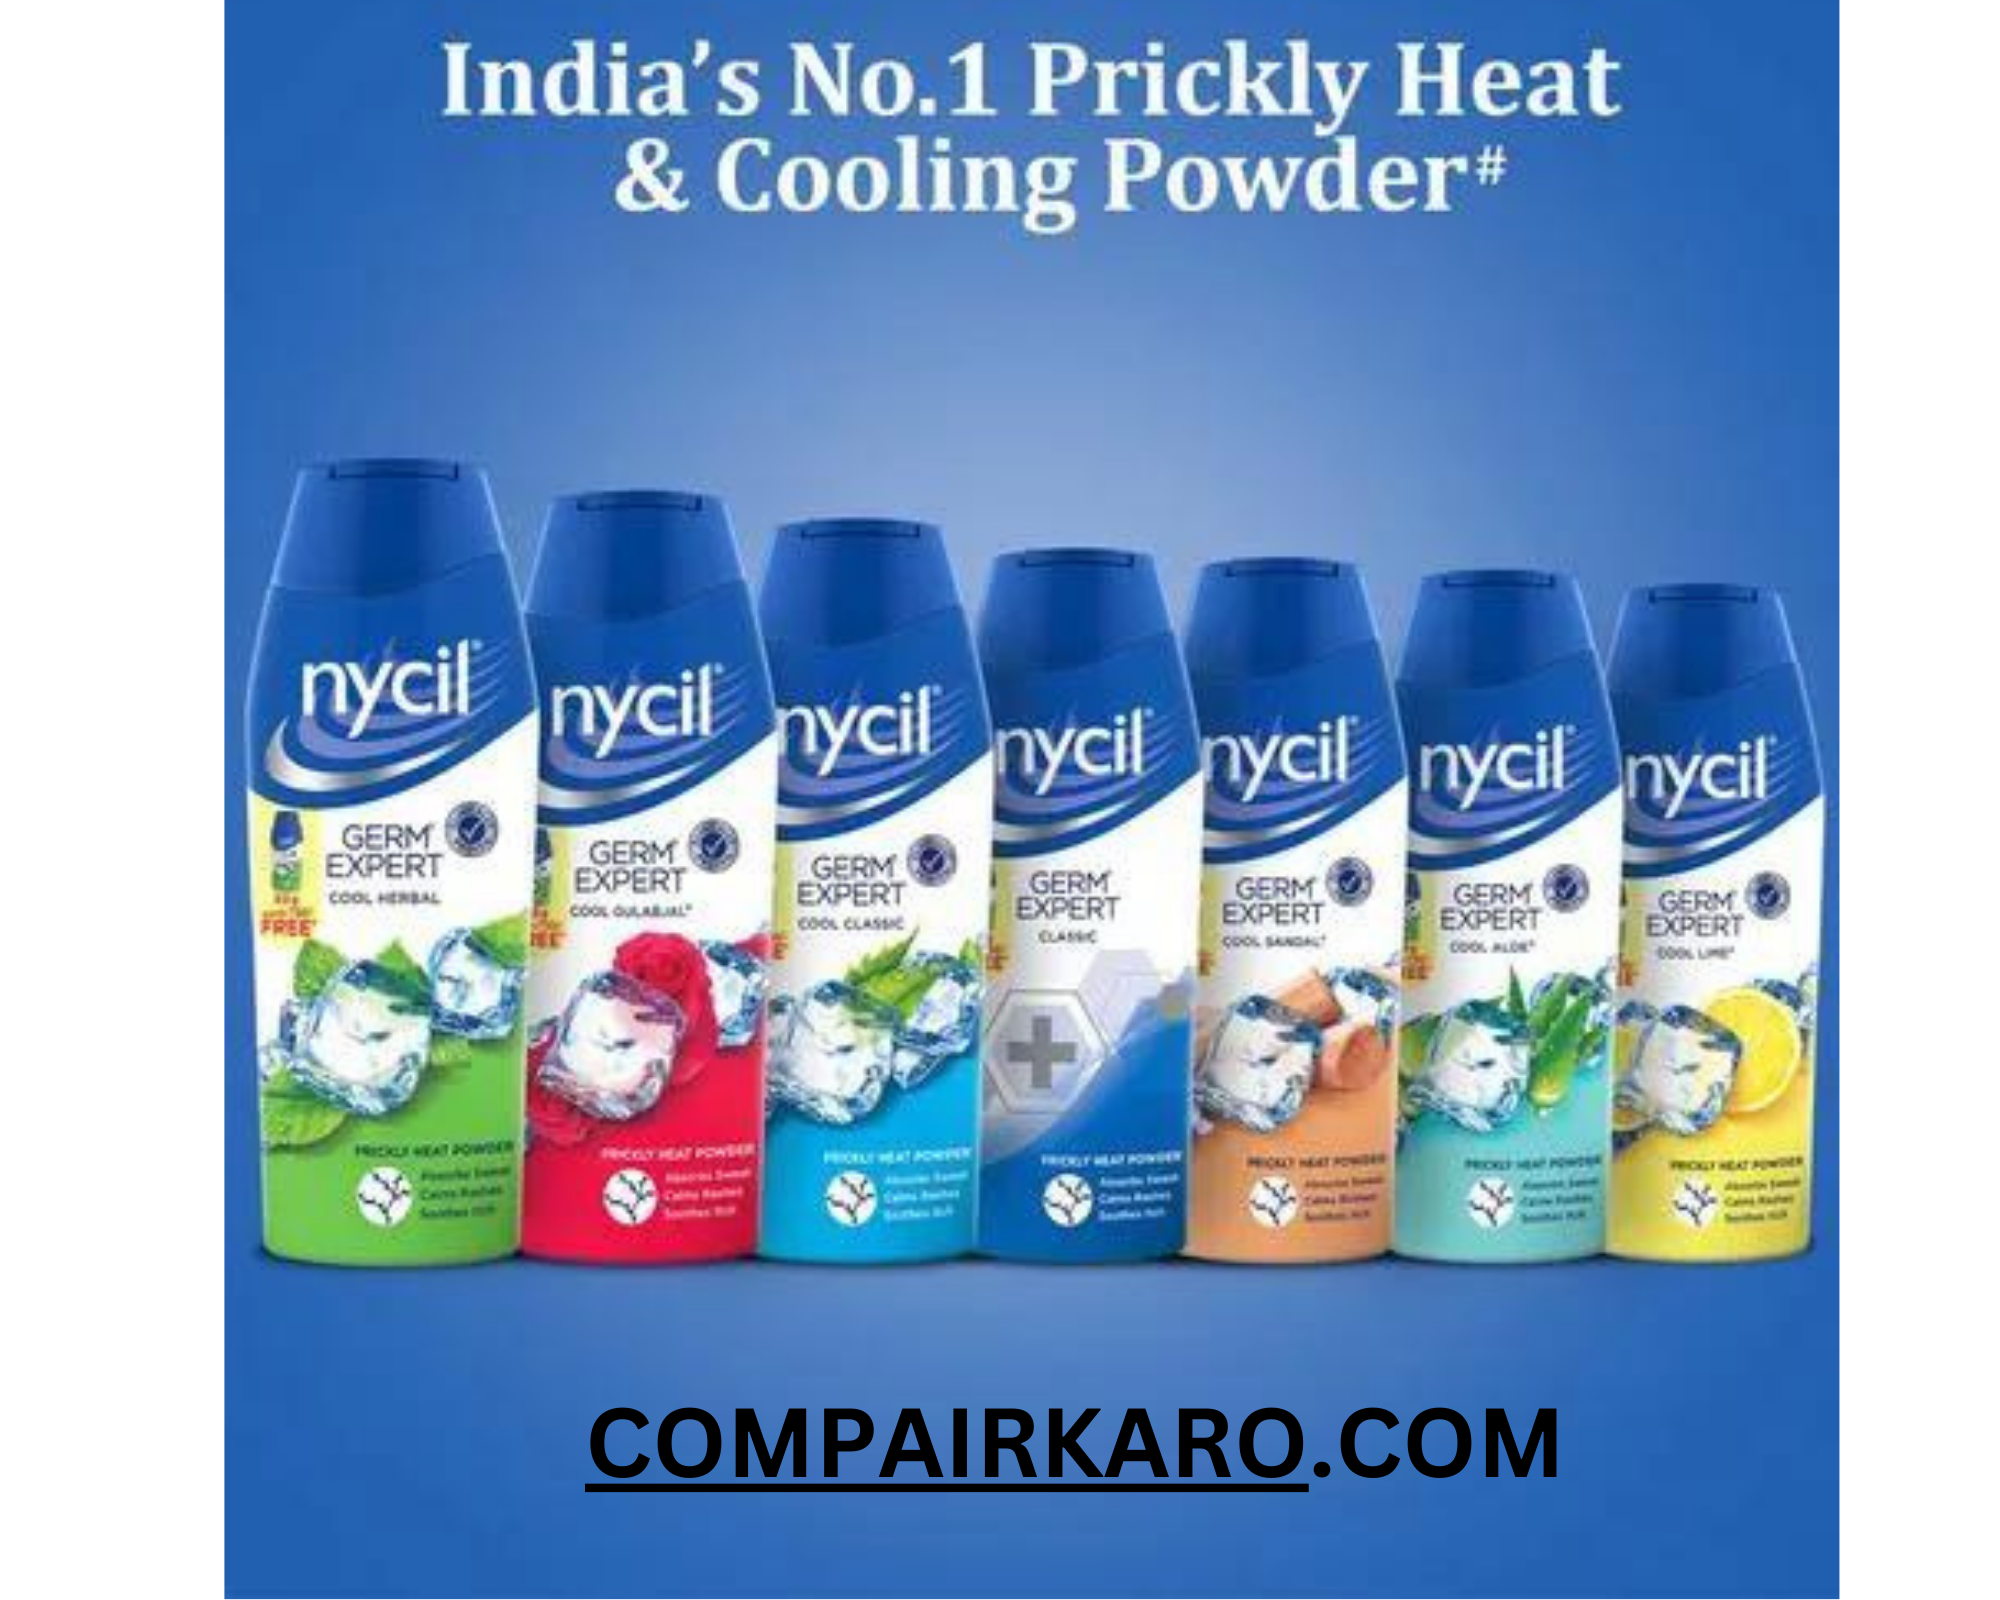 Nycil Vs Dermi COOL Which Is The Best Powder In Summer